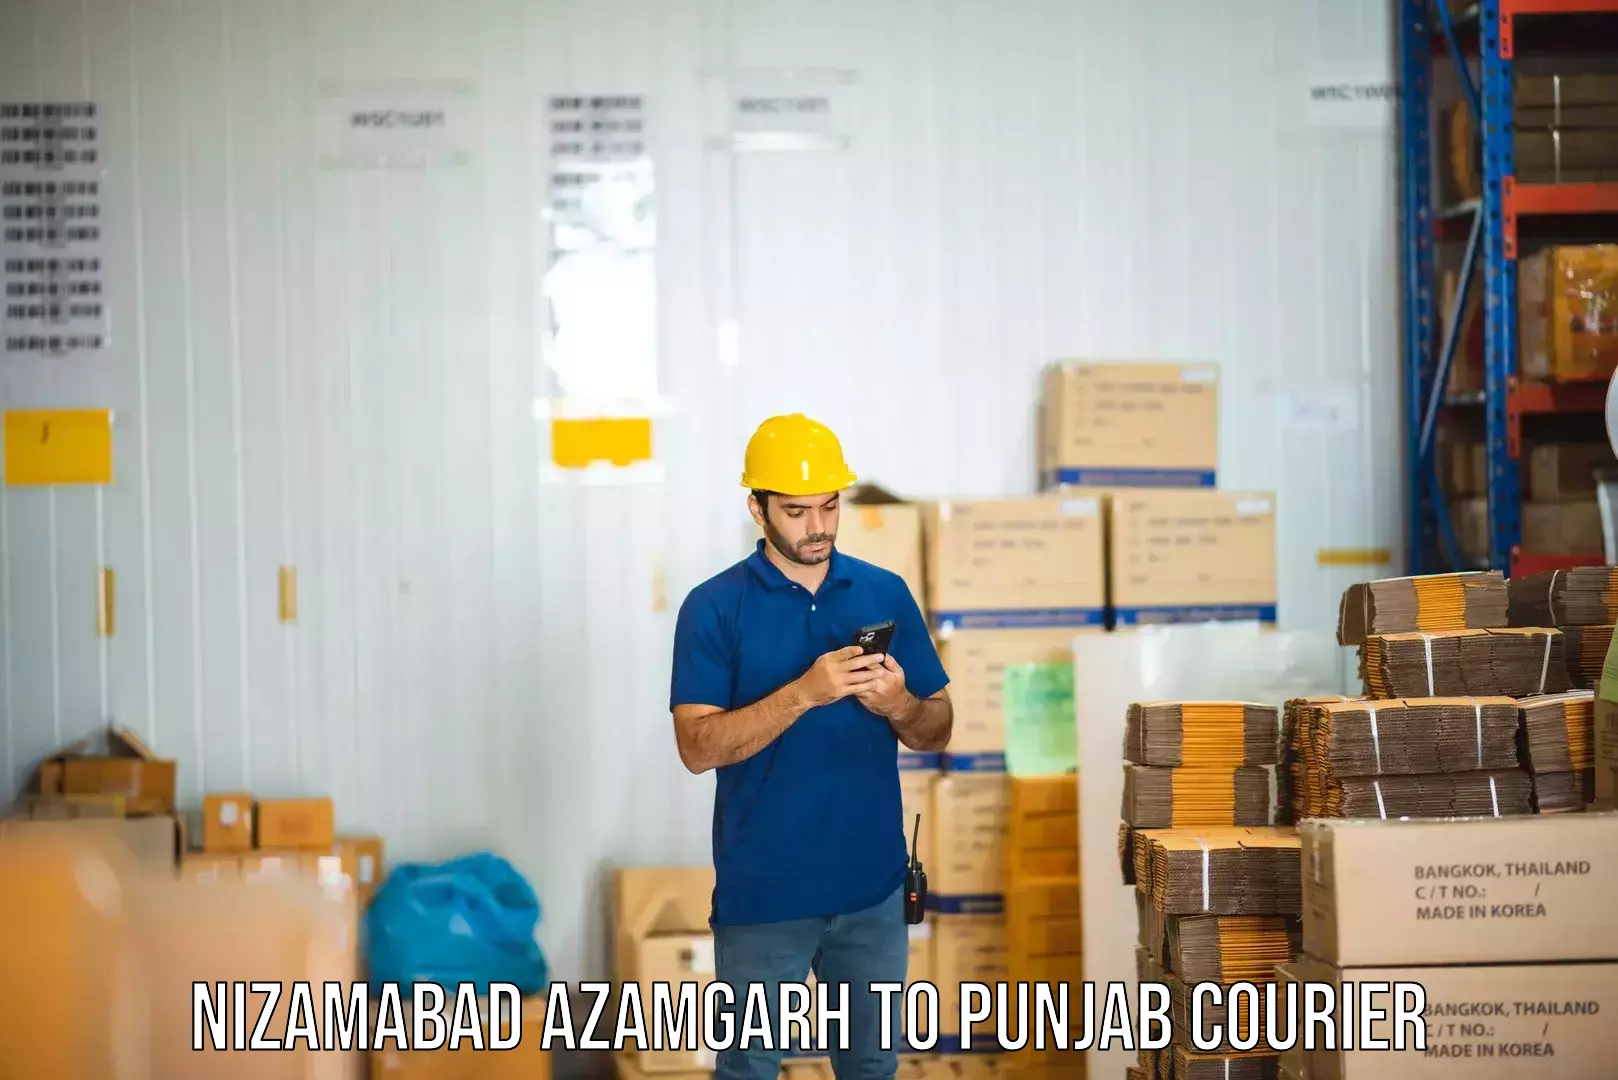 Quality courier services in Nizamabad Azamgarh to Punjab